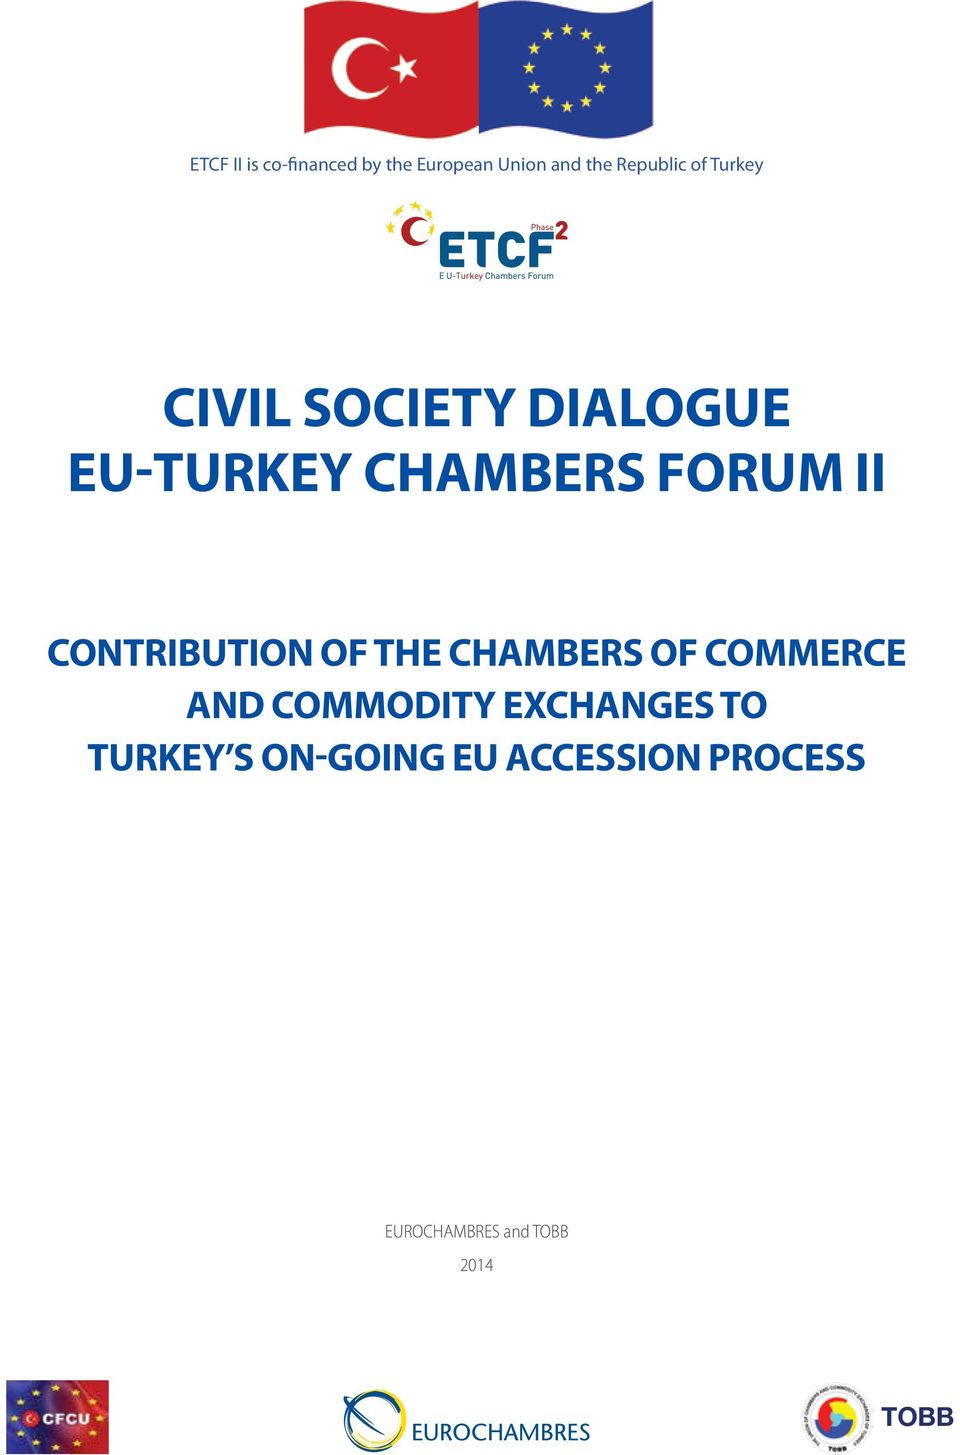 CONTRIBUTION OF THE CHAMBERS OF COMMERCE AND COMMODITY EXCHANGES